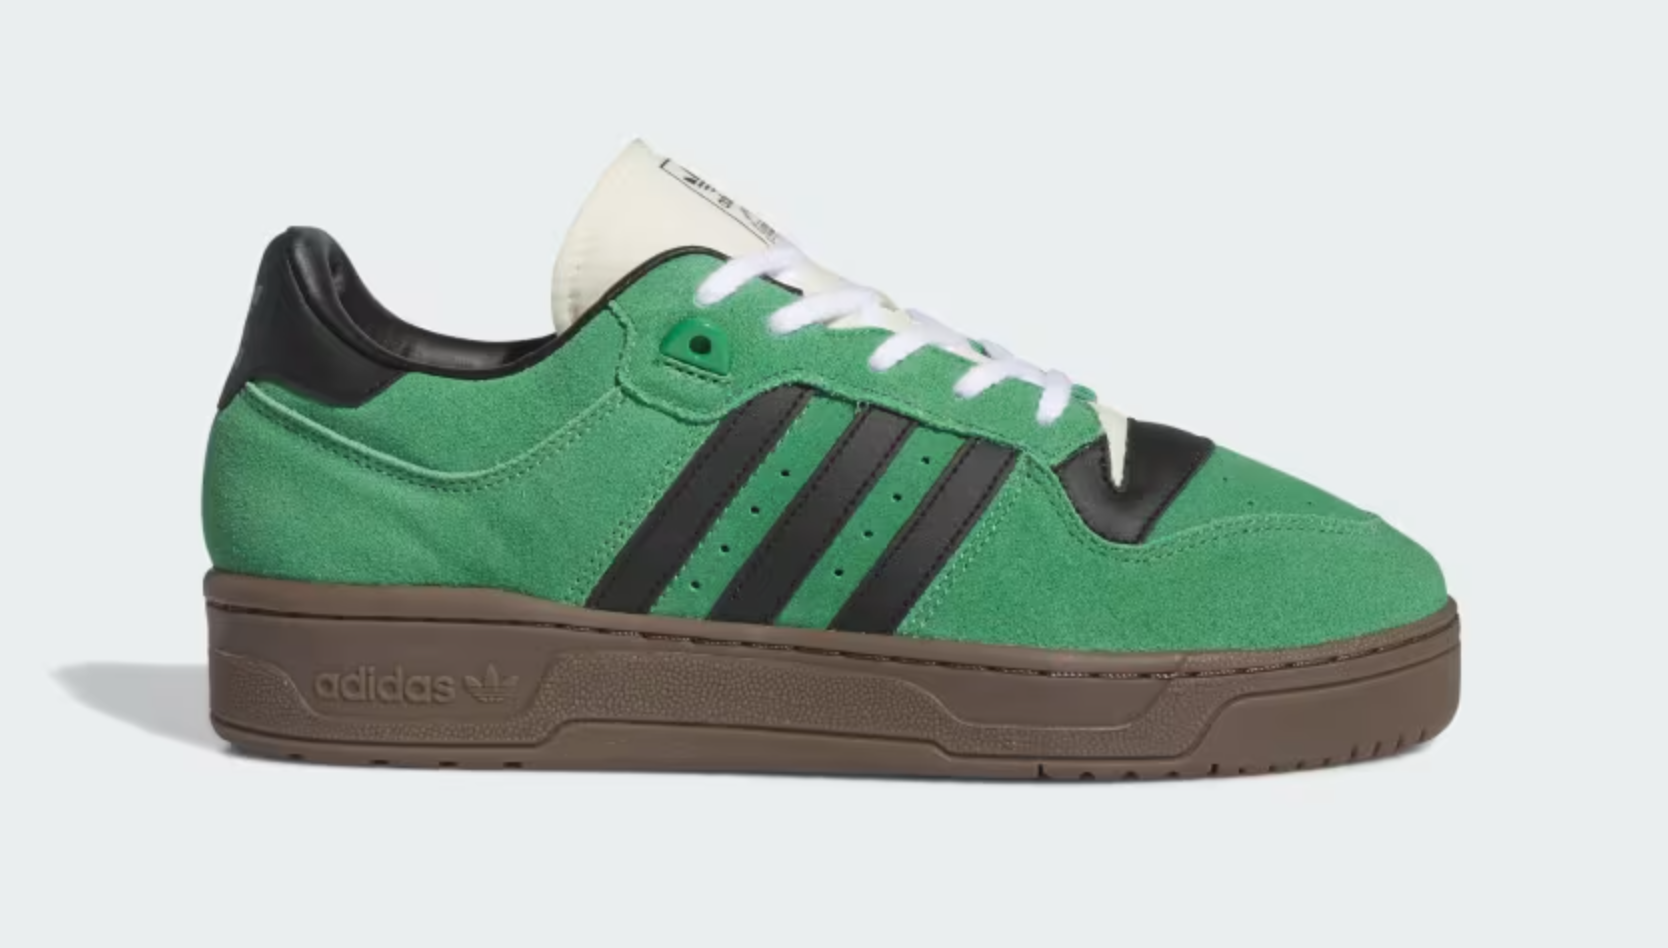 adidas Rivalry 86 Low “Preloved Green” Releases May 1st